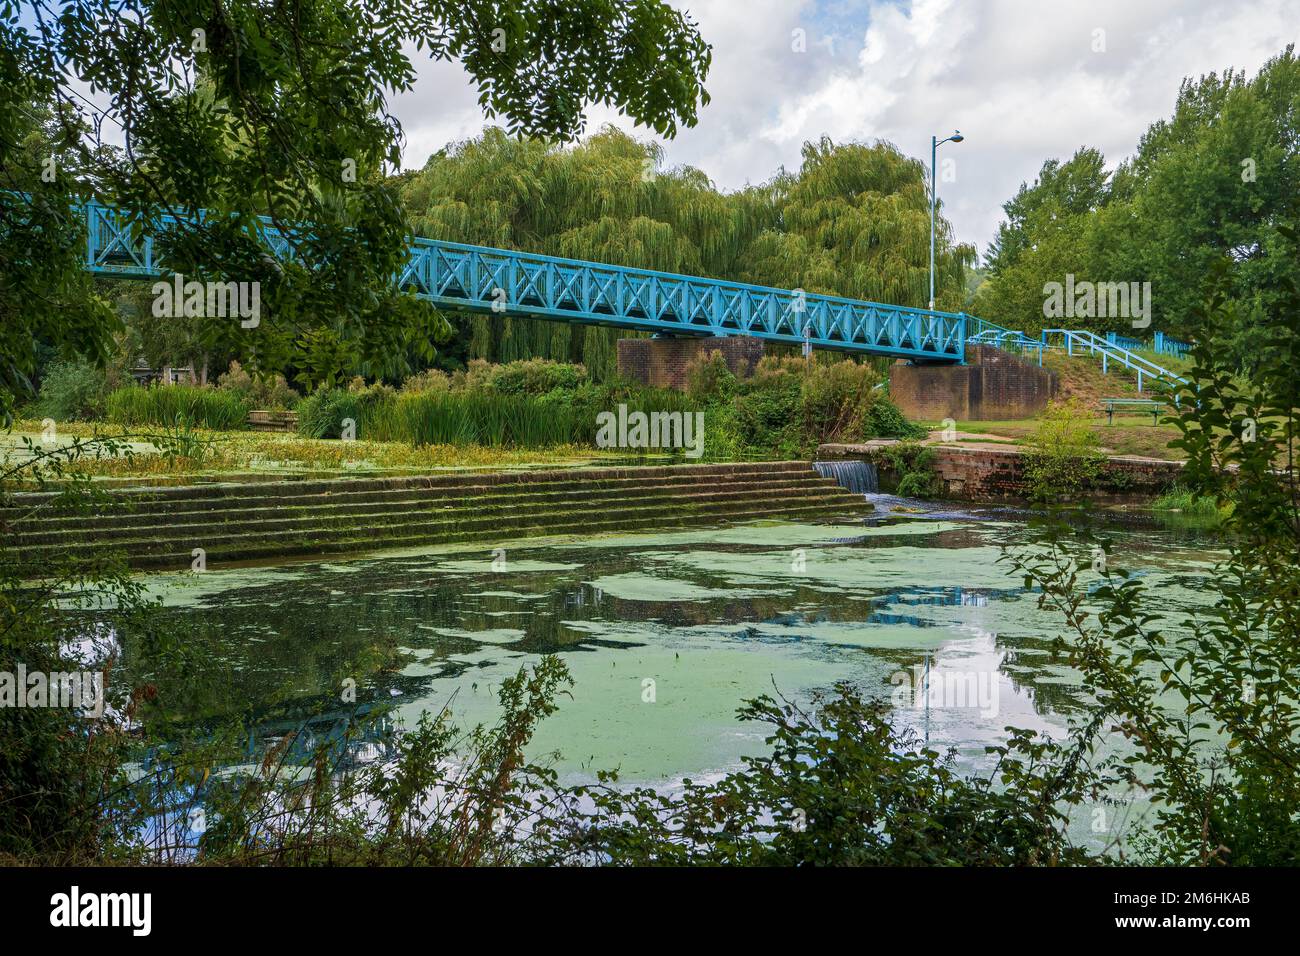 Bridge and weir over the river Stour at Blandford Forum, Dorset, England, Uk Stock Photo